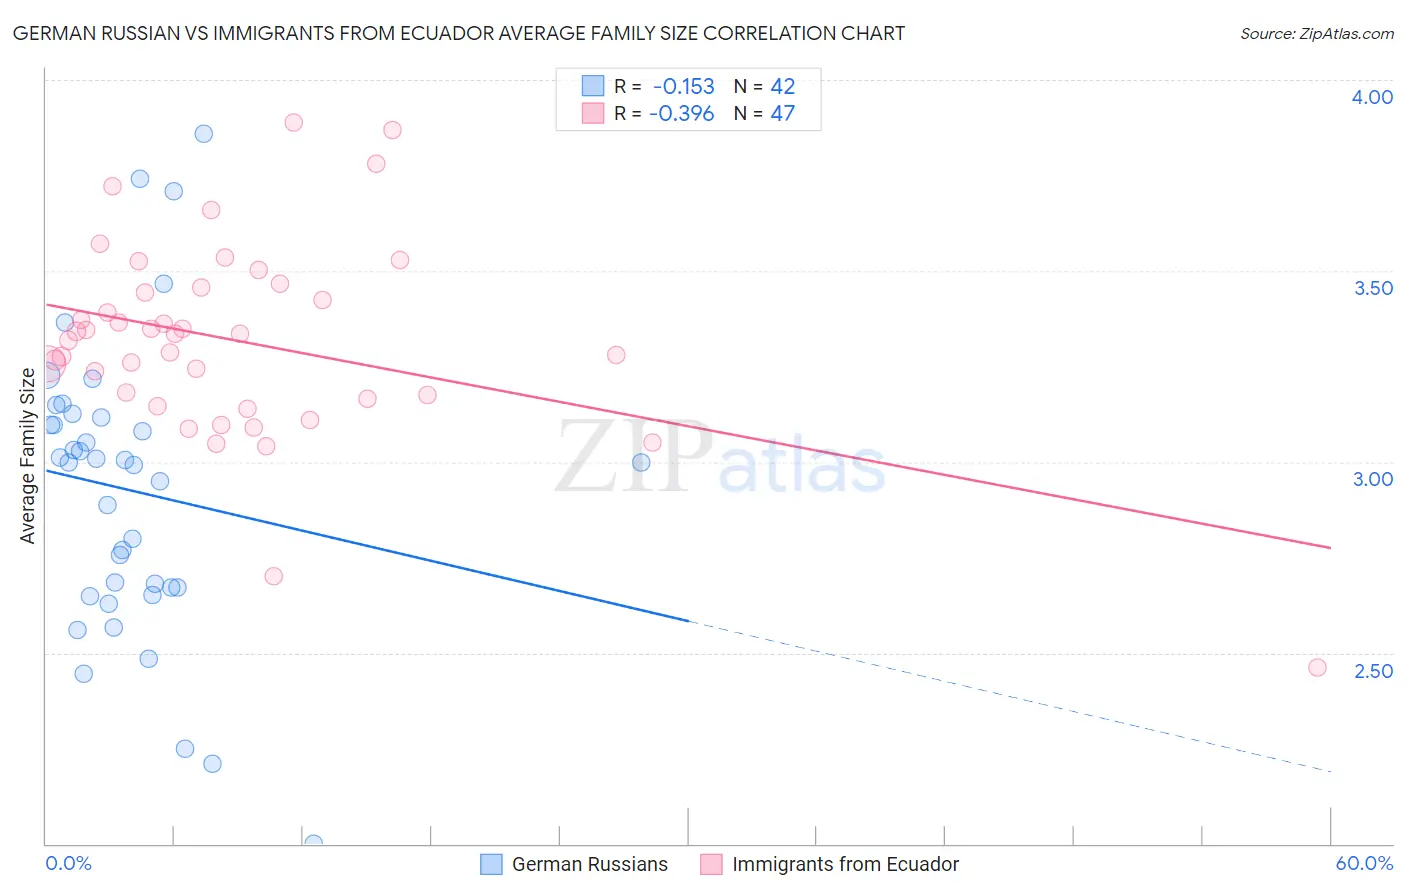 German Russian vs Immigrants from Ecuador Average Family Size